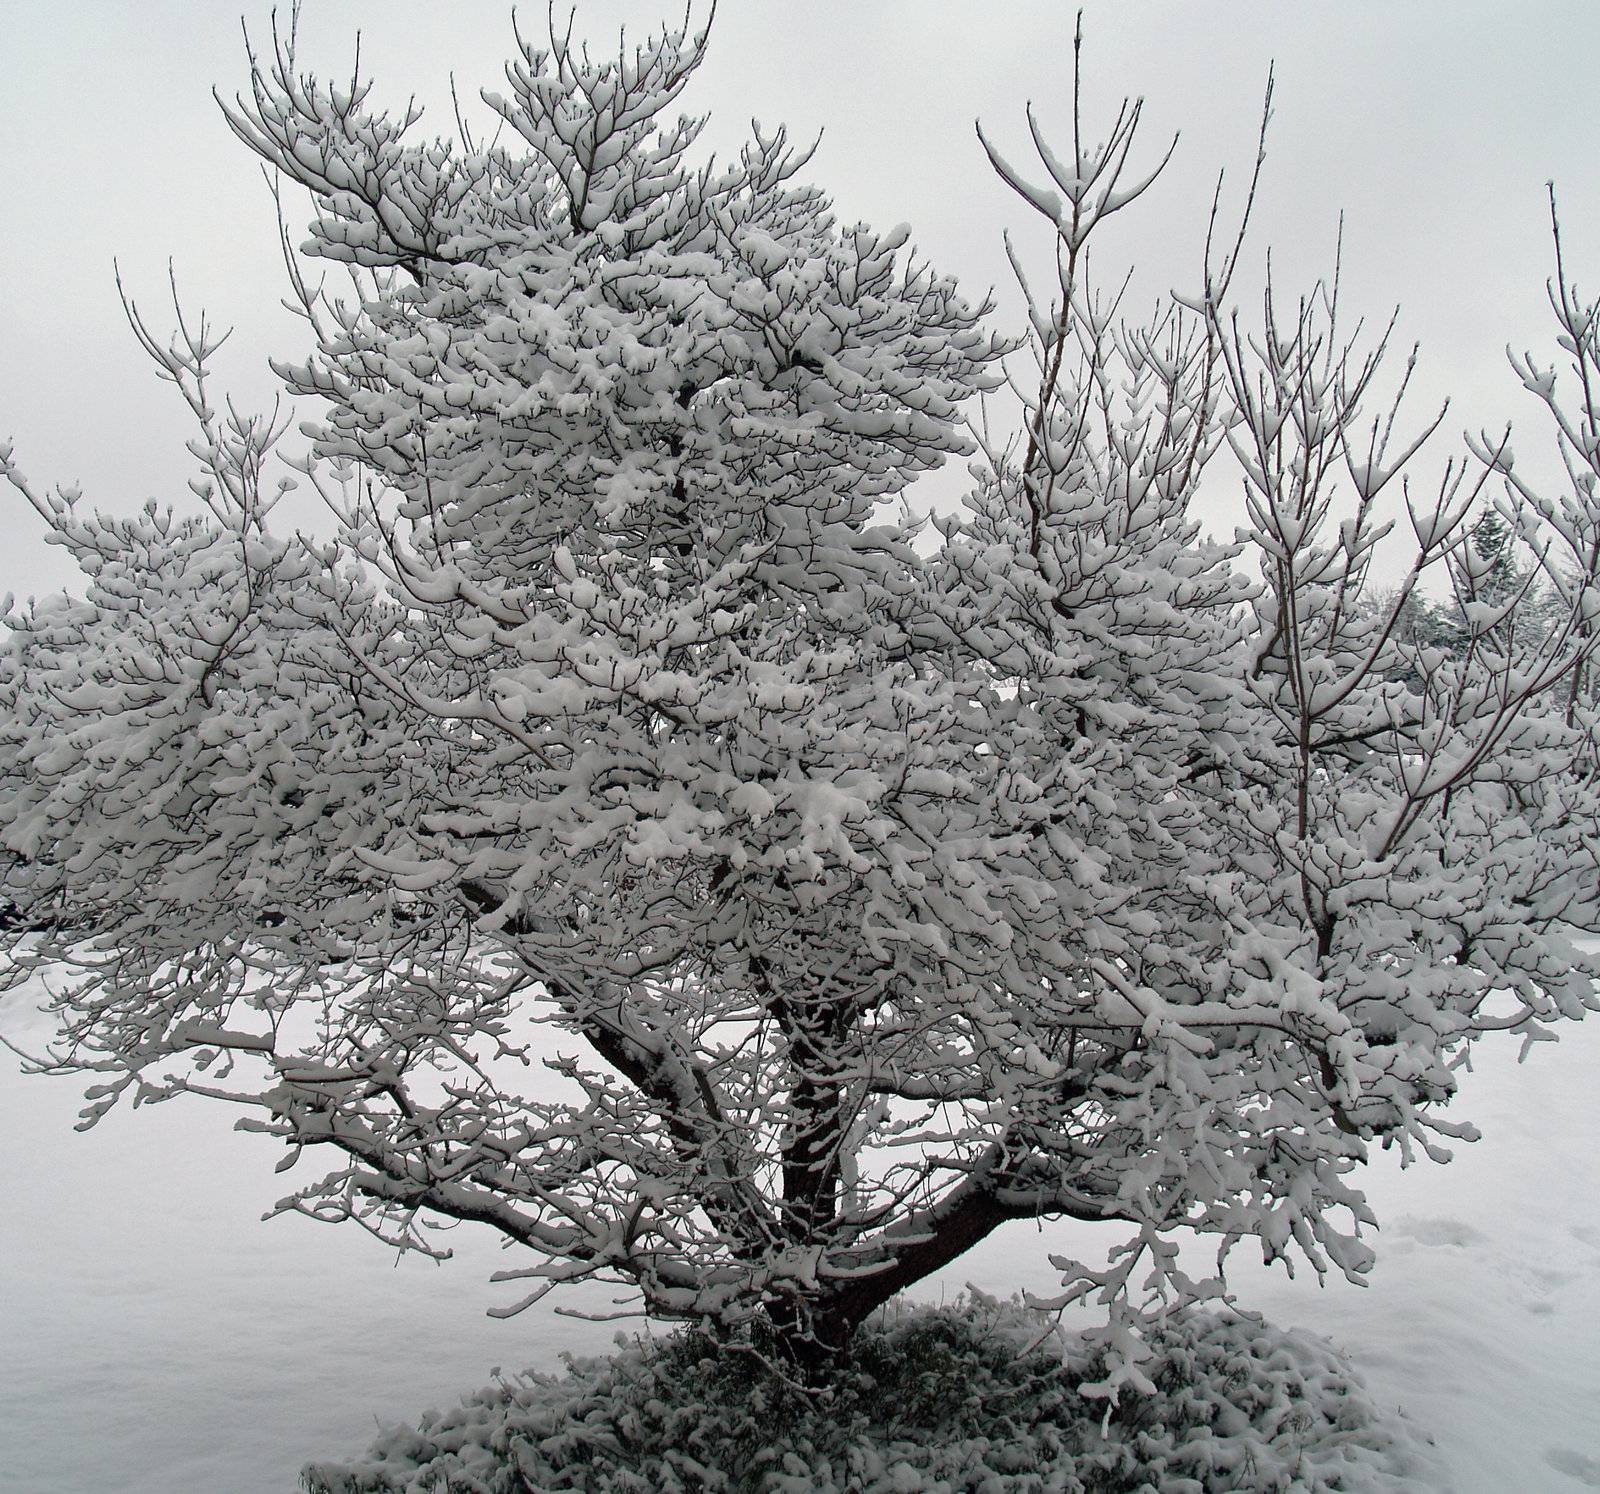 Snow Covered Branches on a Tree After a Snowfall